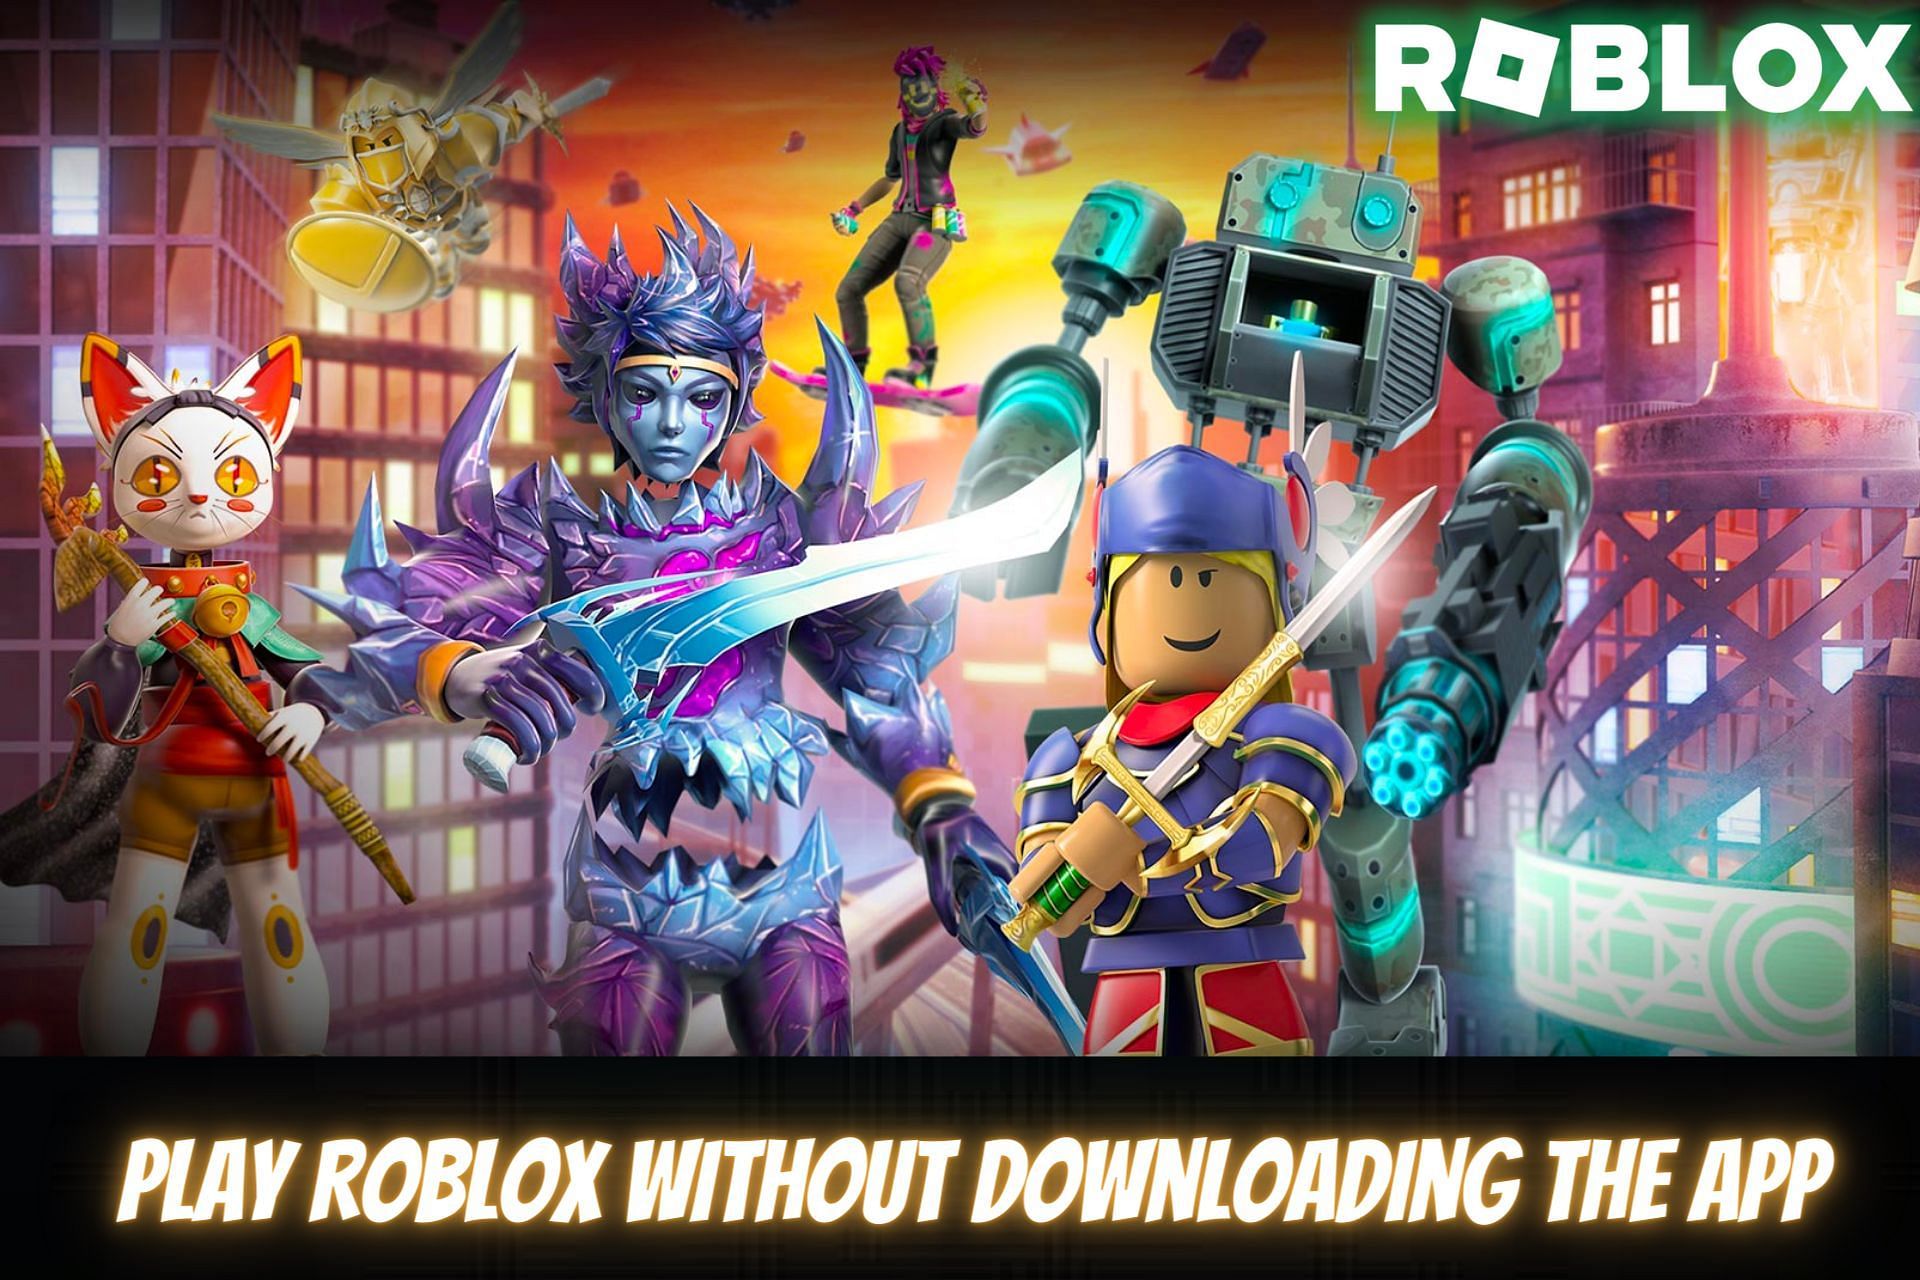 Play games on Roblox without downloading the app (Image via Roblox)